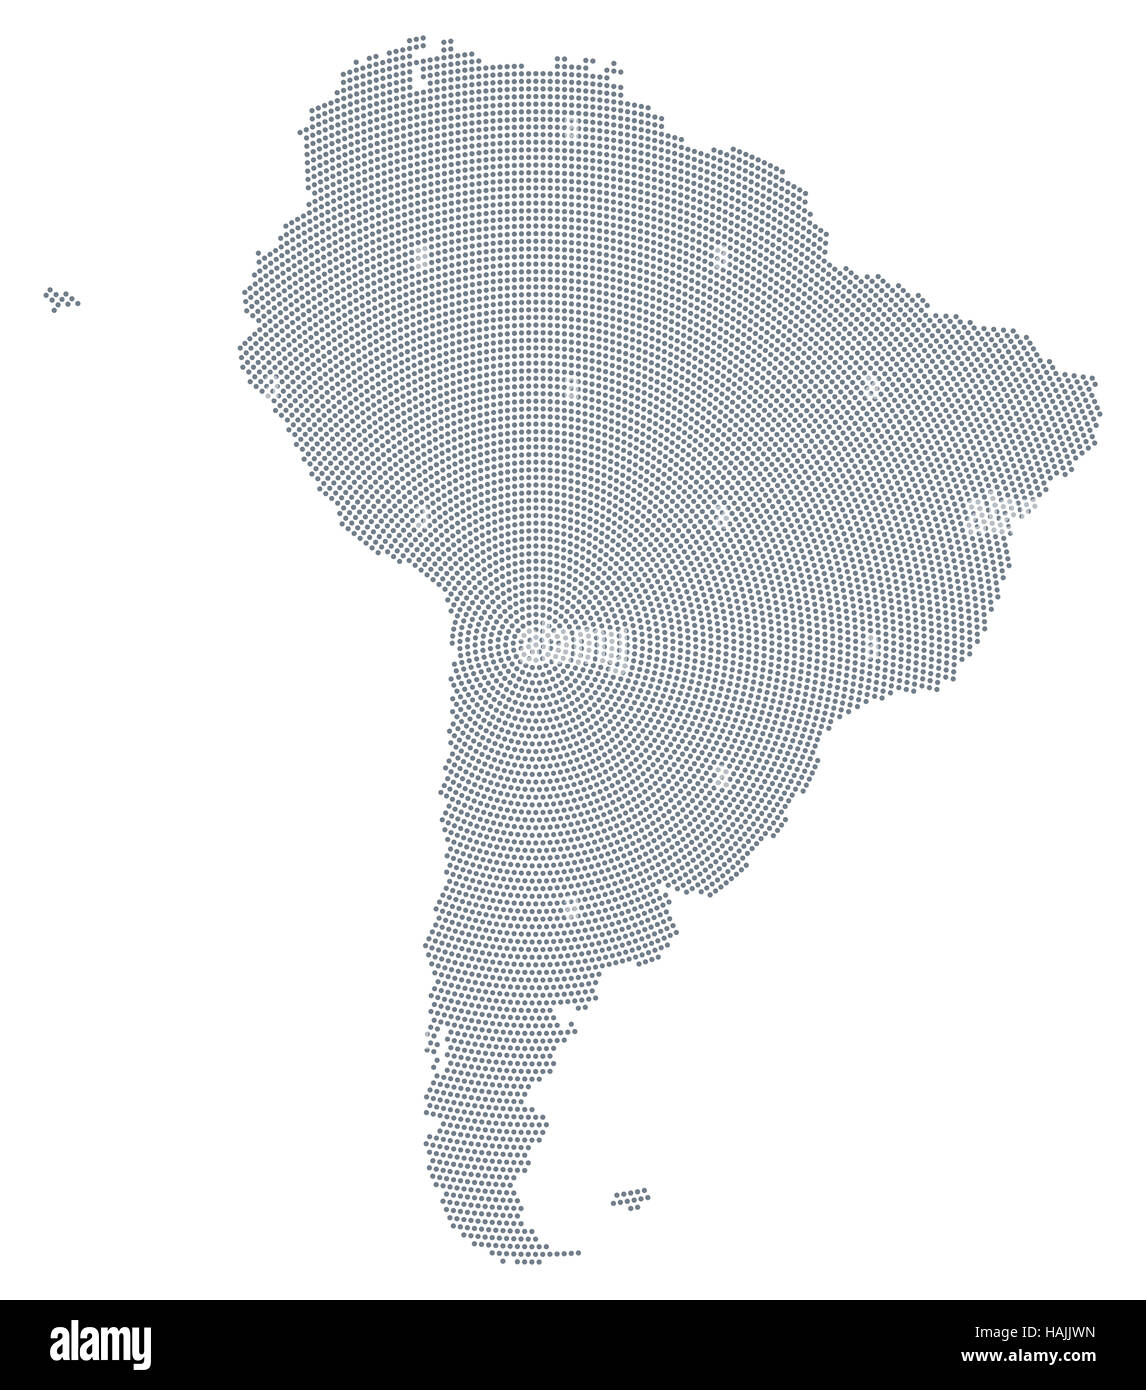 South America map radial dot pattern. Gray dots going from the center forming the silhouettes of the continent. Stock Photo